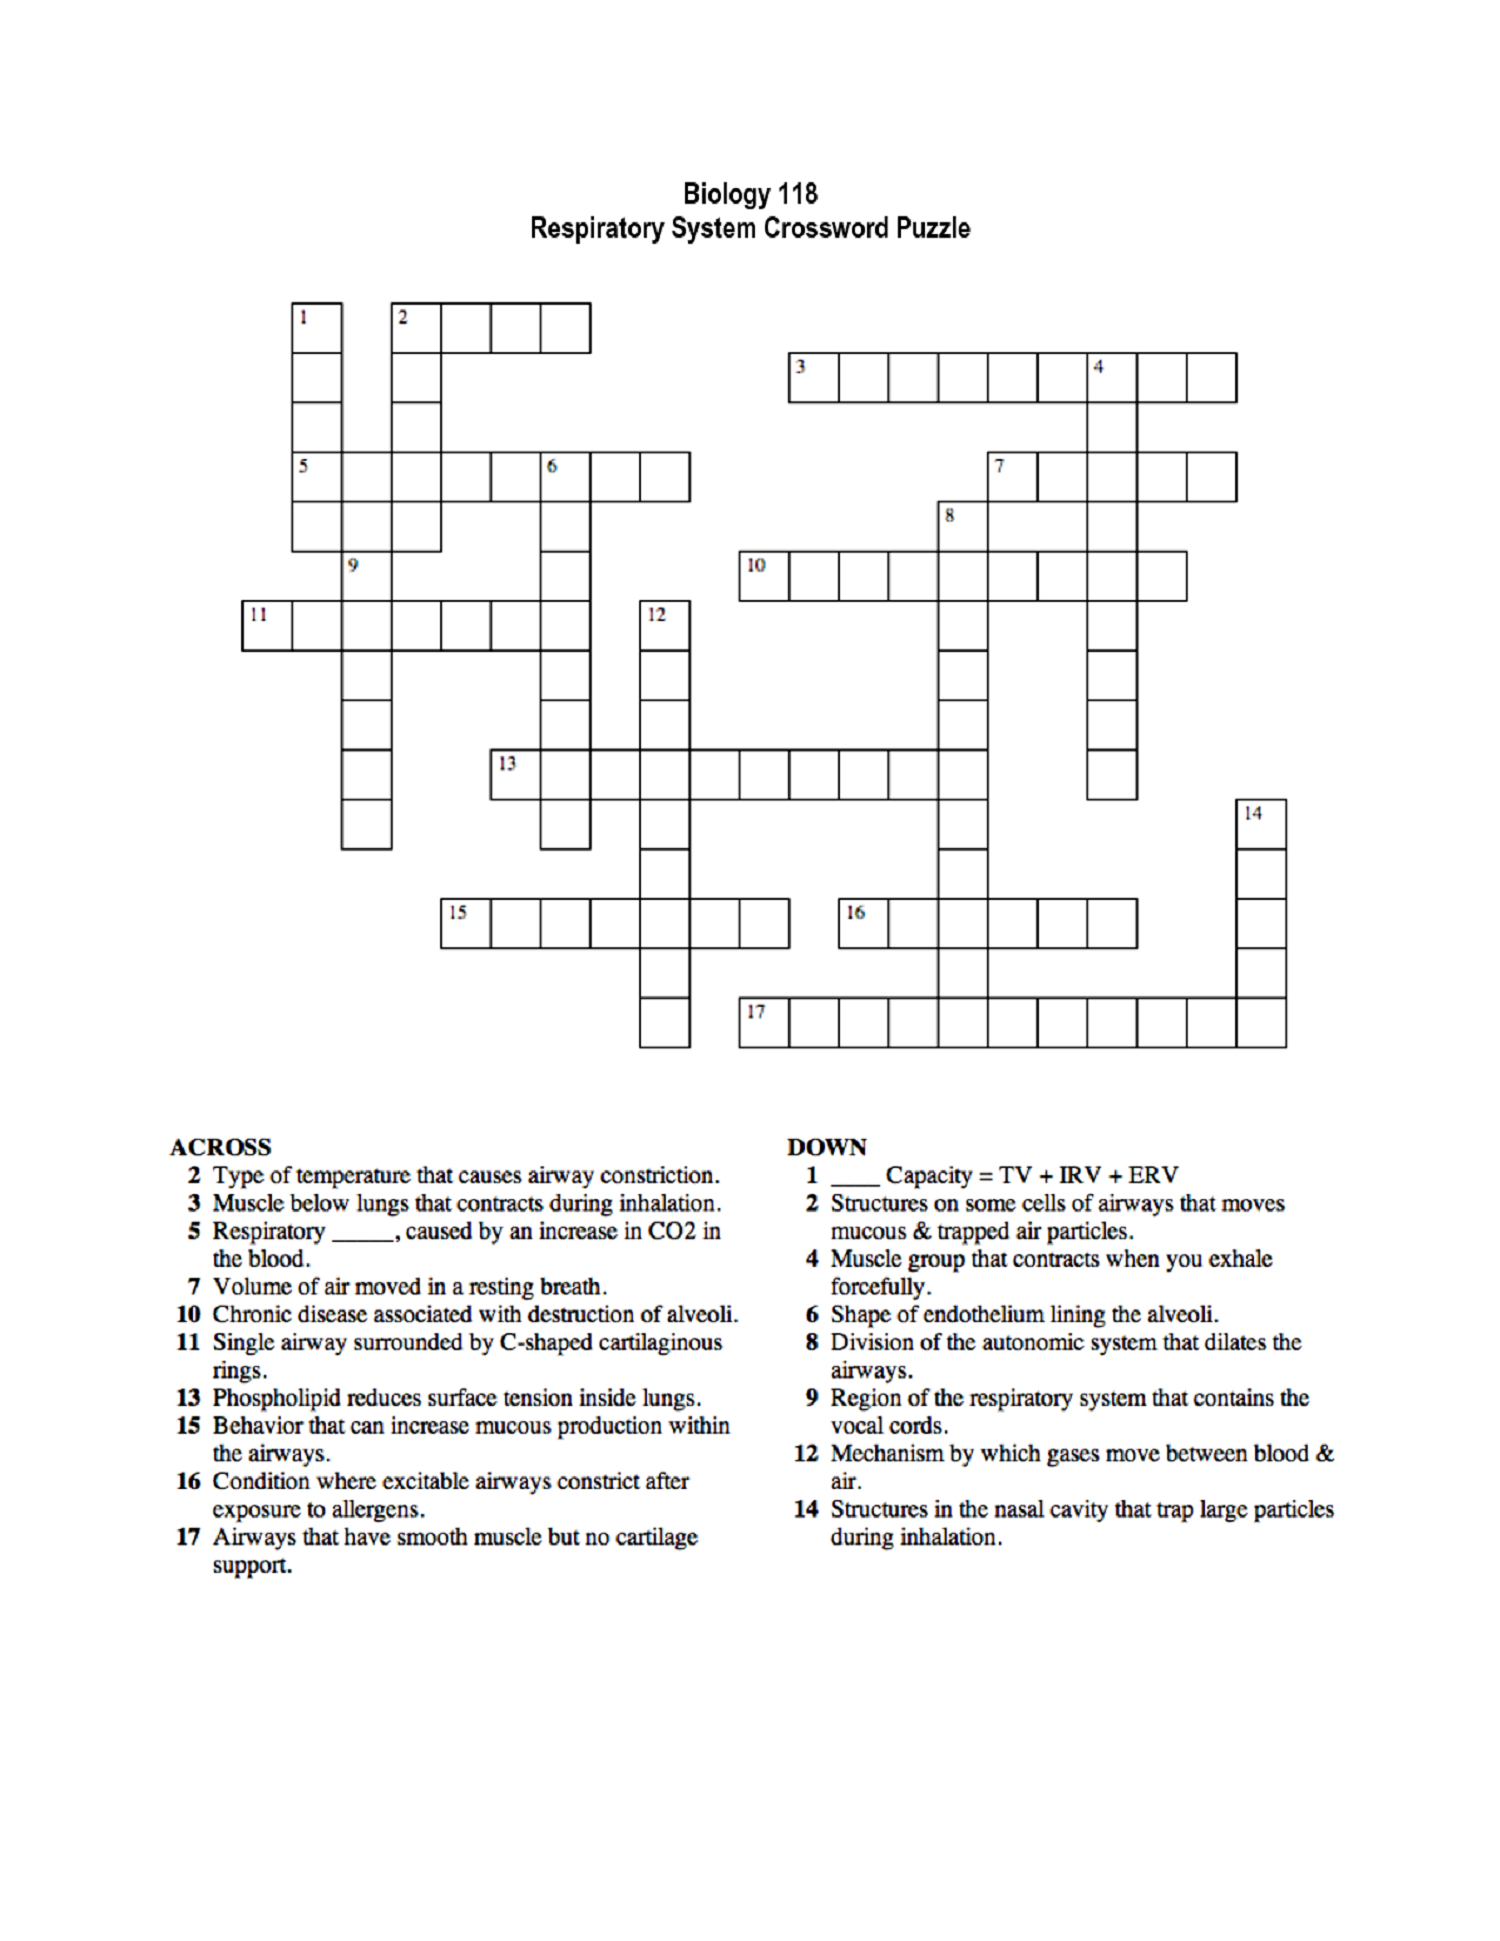 Respiratory Systems Crossword For Word Therapy | Dear Joya - Printable Automotive Crossword Puzzles